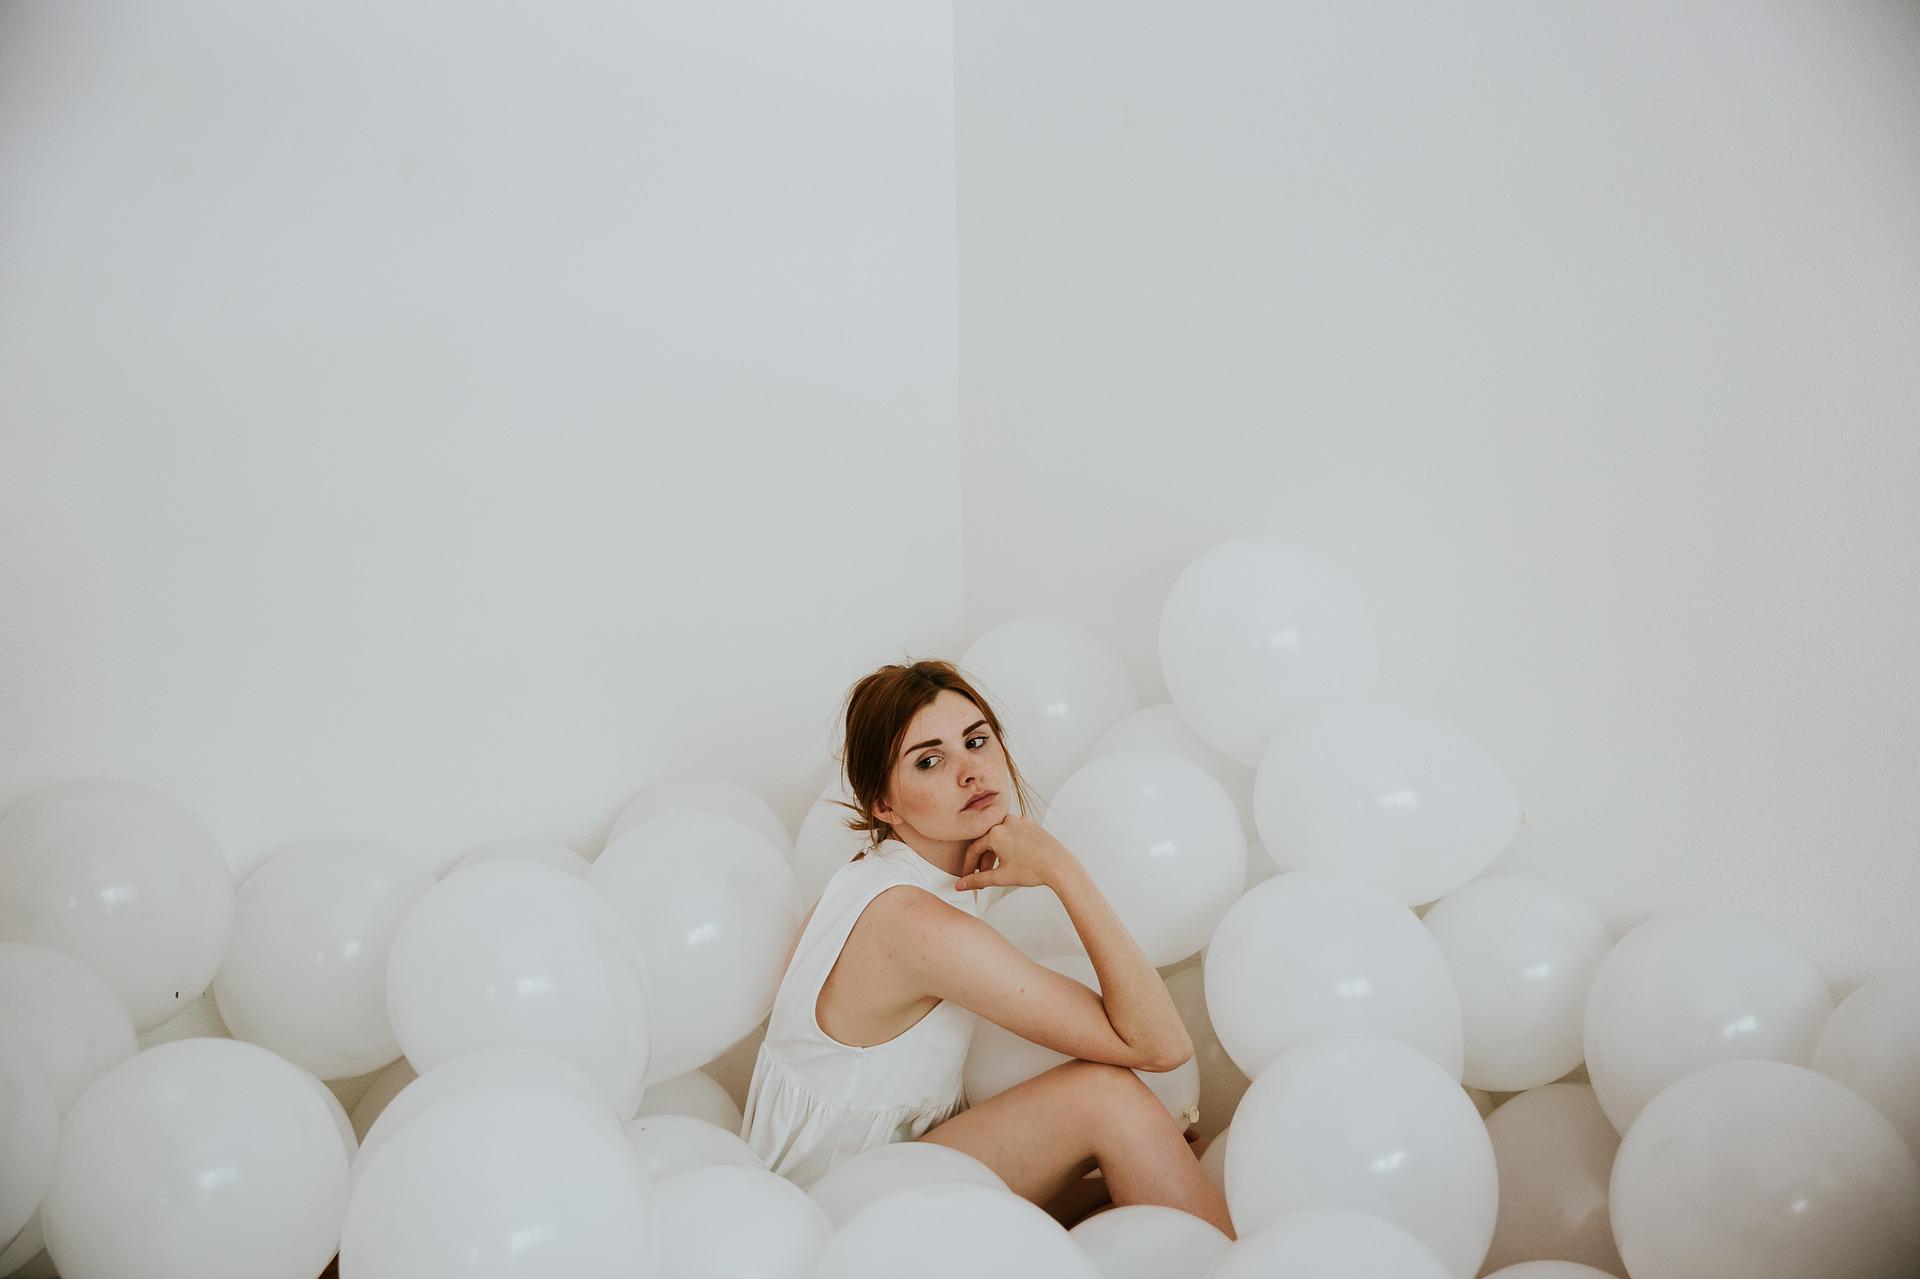 A woman sits among inflated balloons.